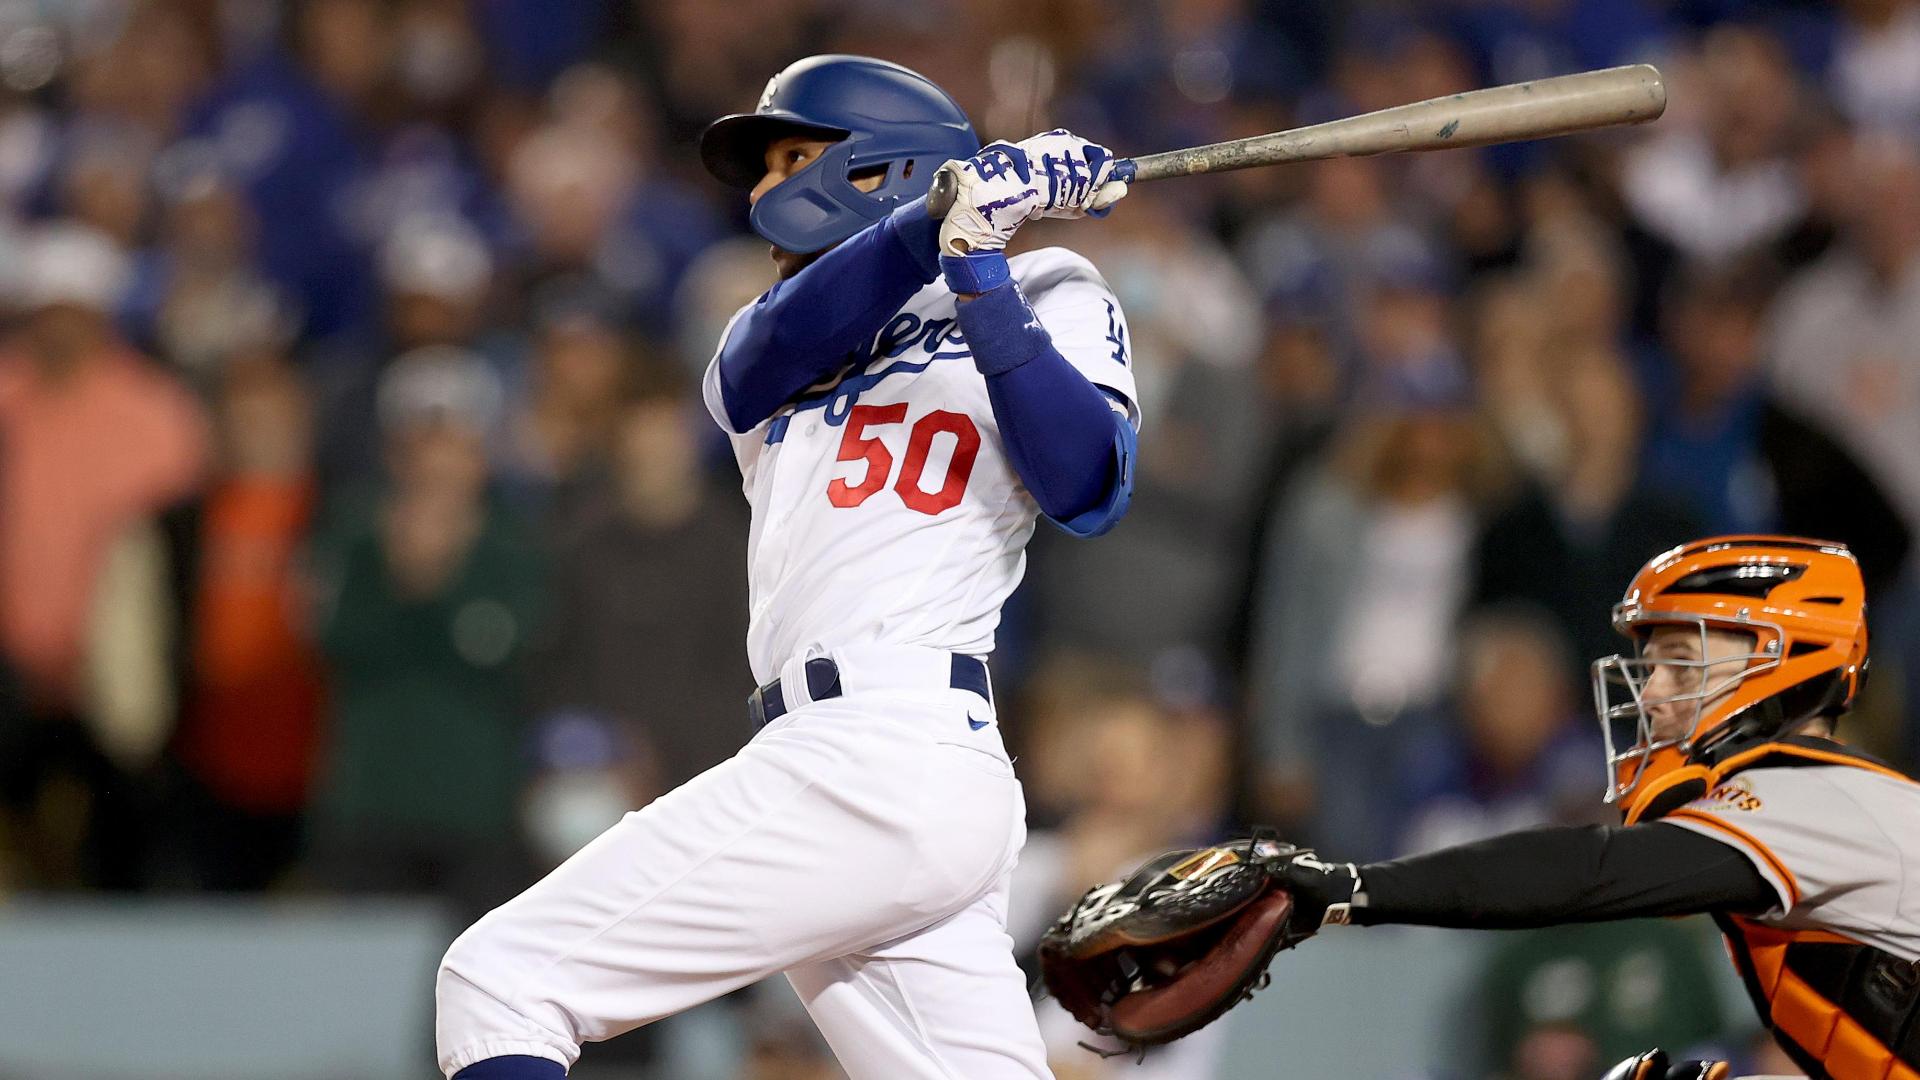 Justin Turner's 3-run home run set tone for Dodgers in NLDS